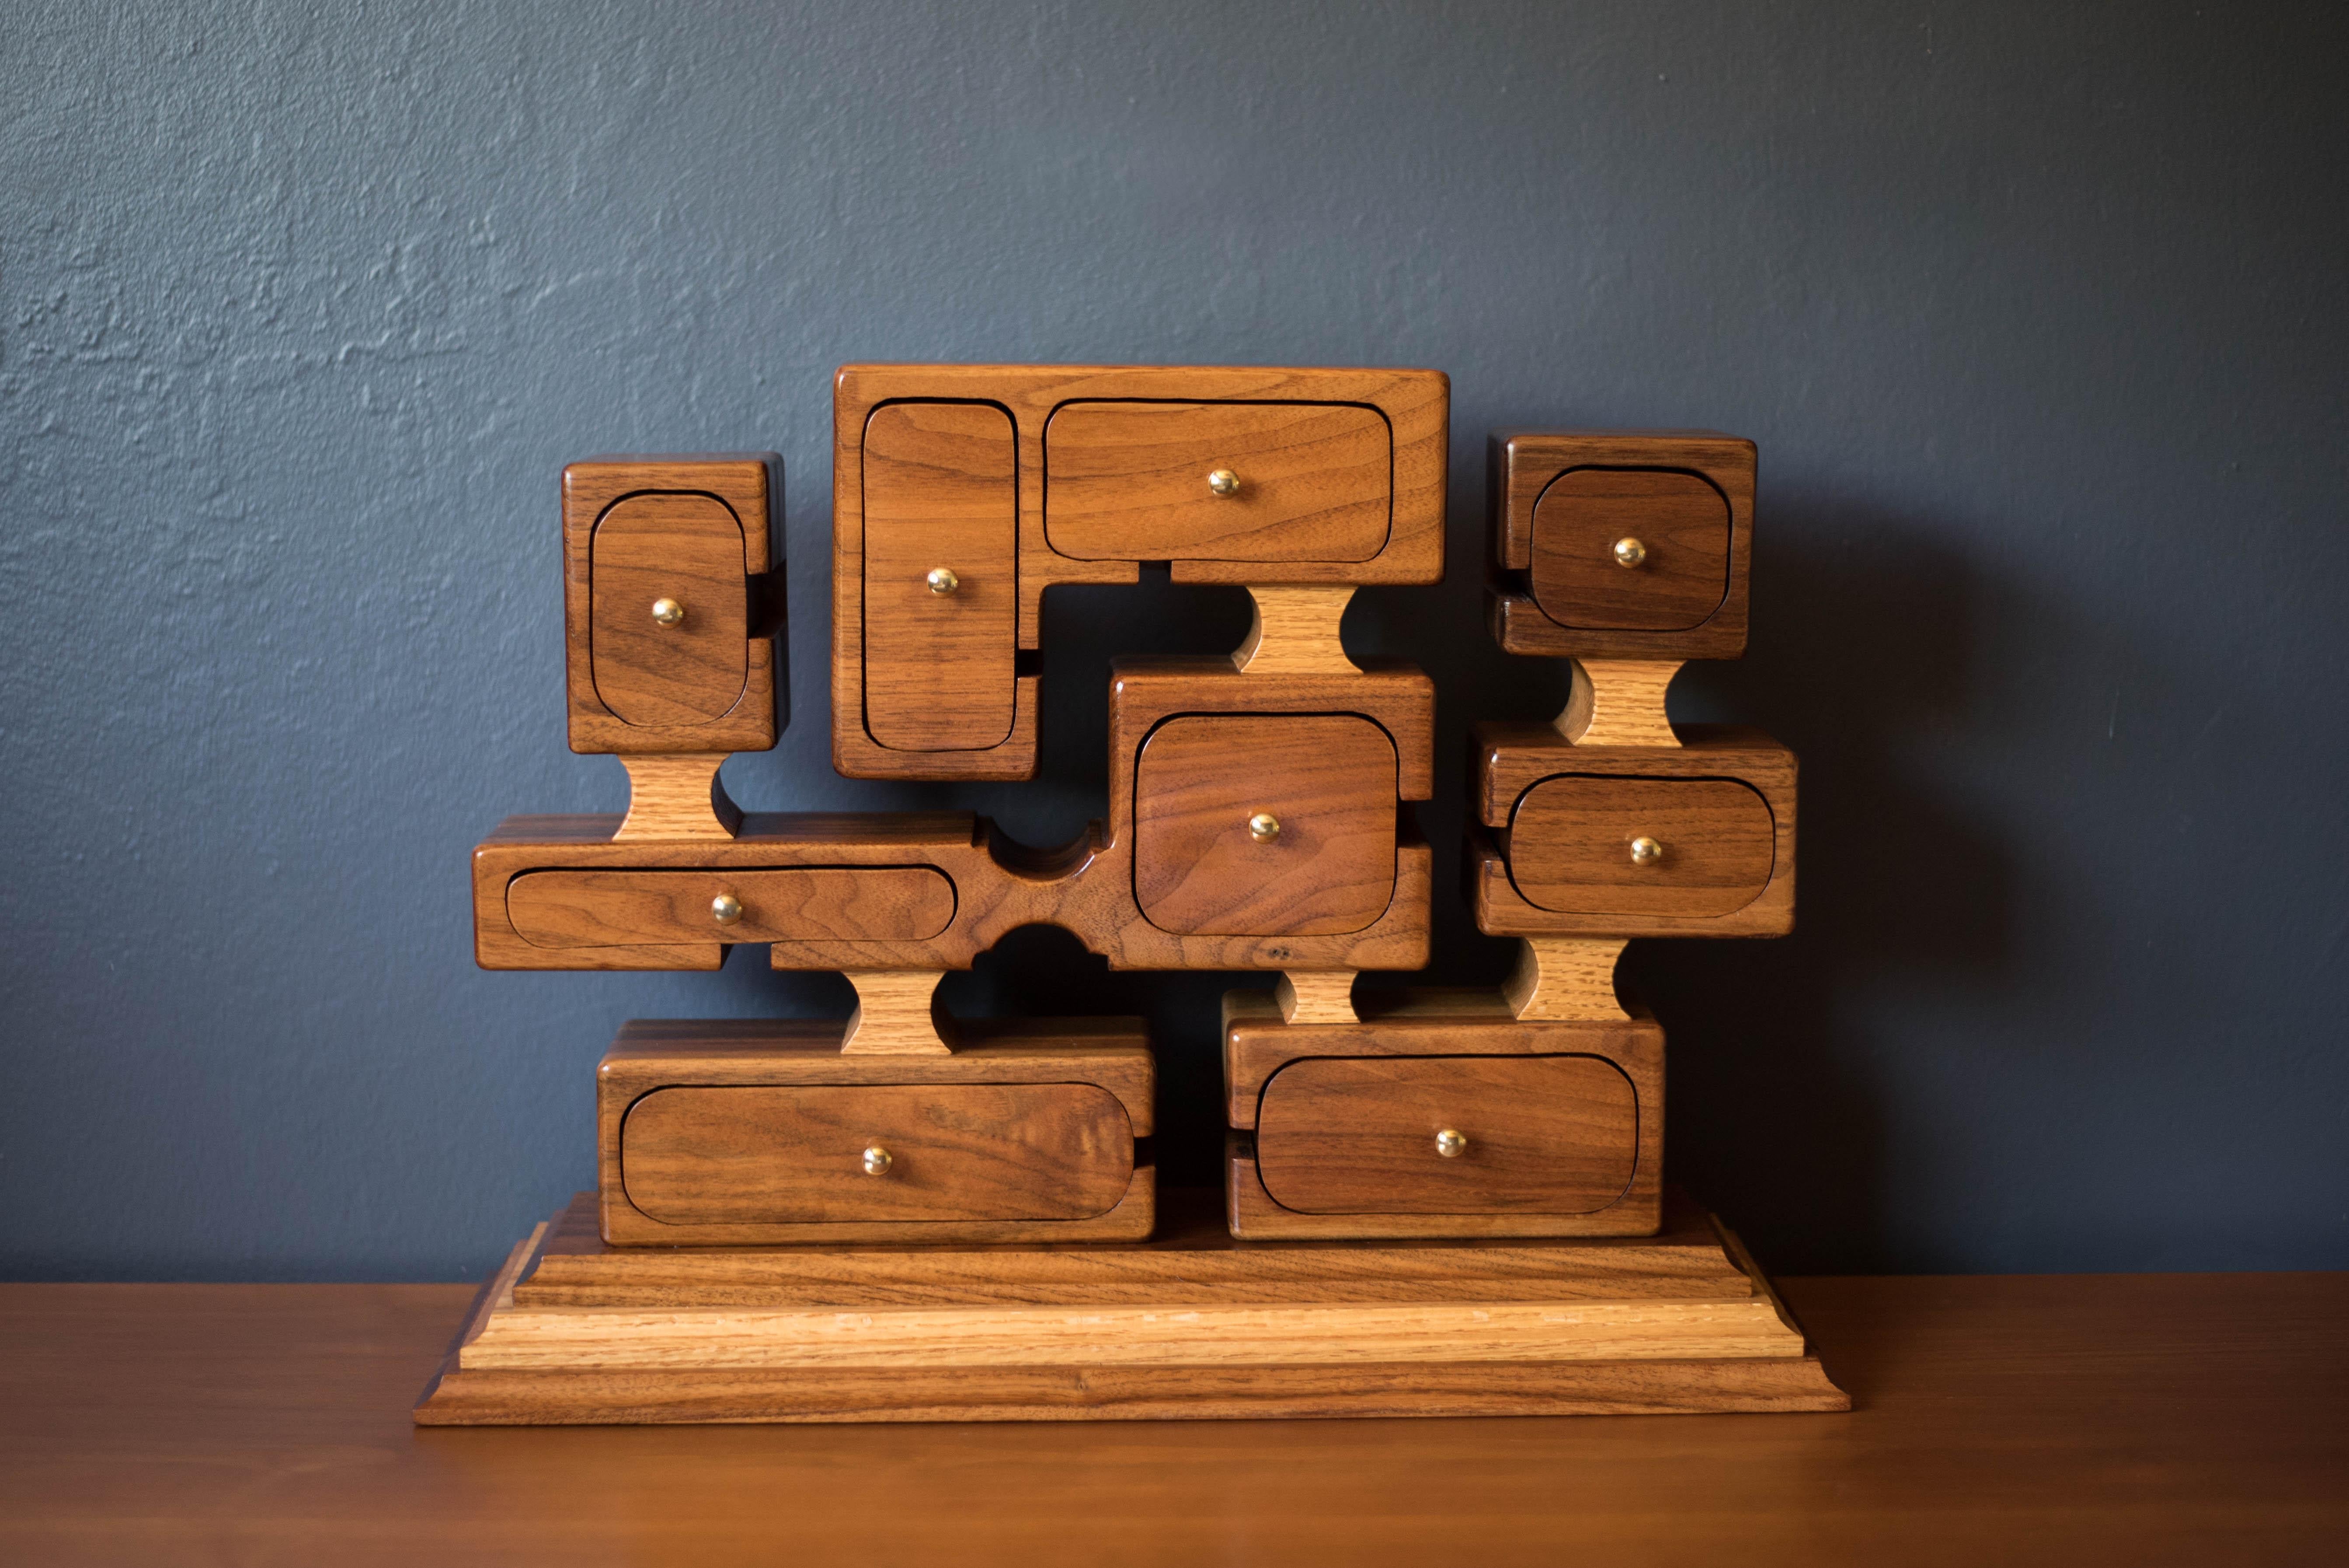 Mid-Century Modern studio organizing jewelry box circa 1970's. This unique piece is handcrafted in solid walnut and oak. Equipped with nine sculptural compartment boxes in various shapes and sizes accented with brass pulls and includes interior felt